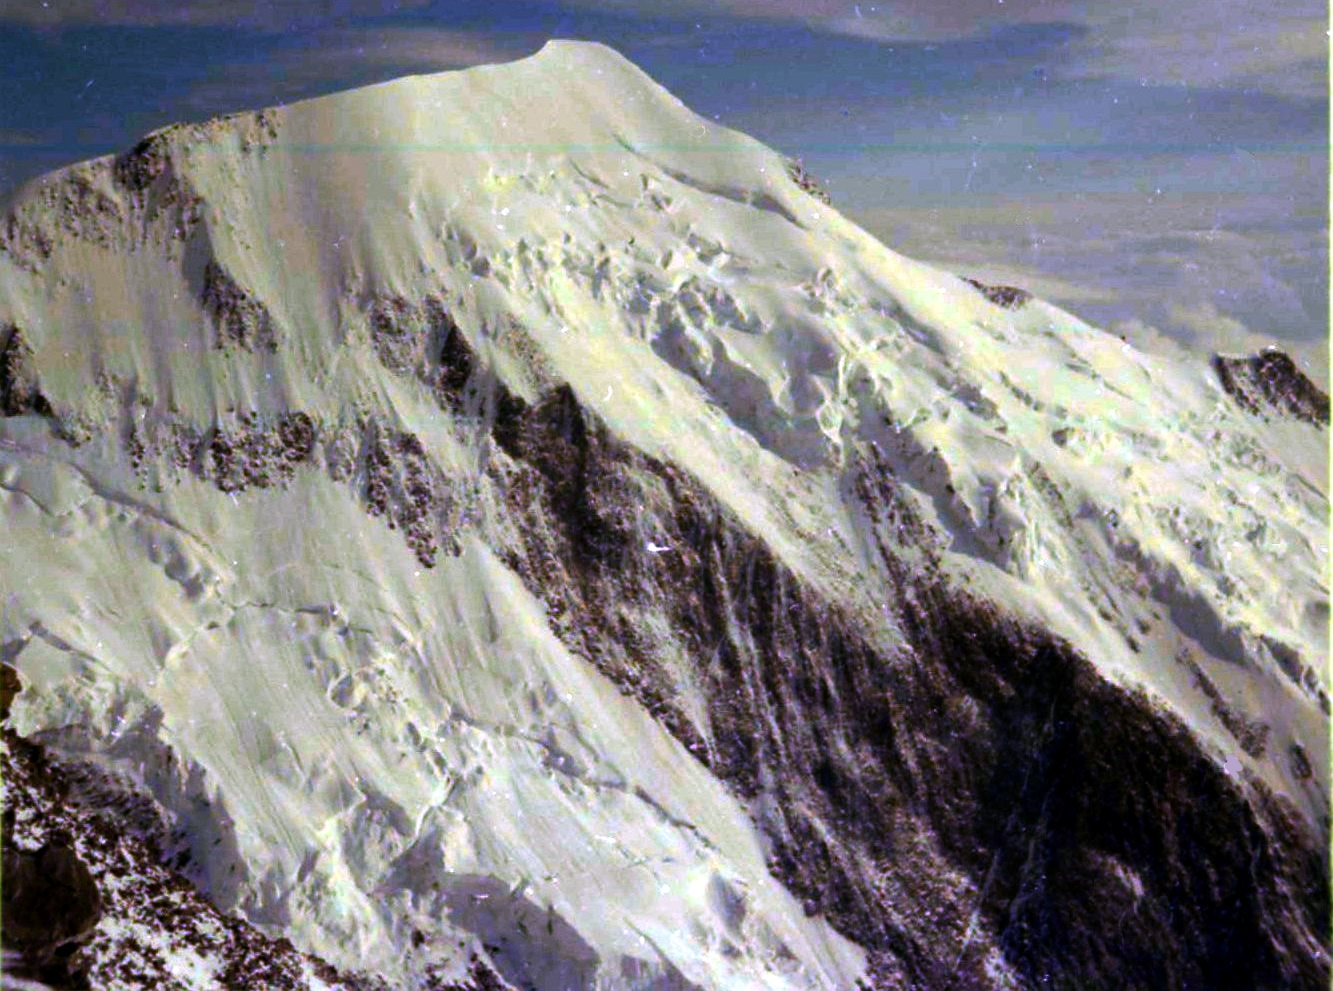 Aiguille de Bionnassay ( 4,052 meters ) on the normal route of ascent of Mont Blanc